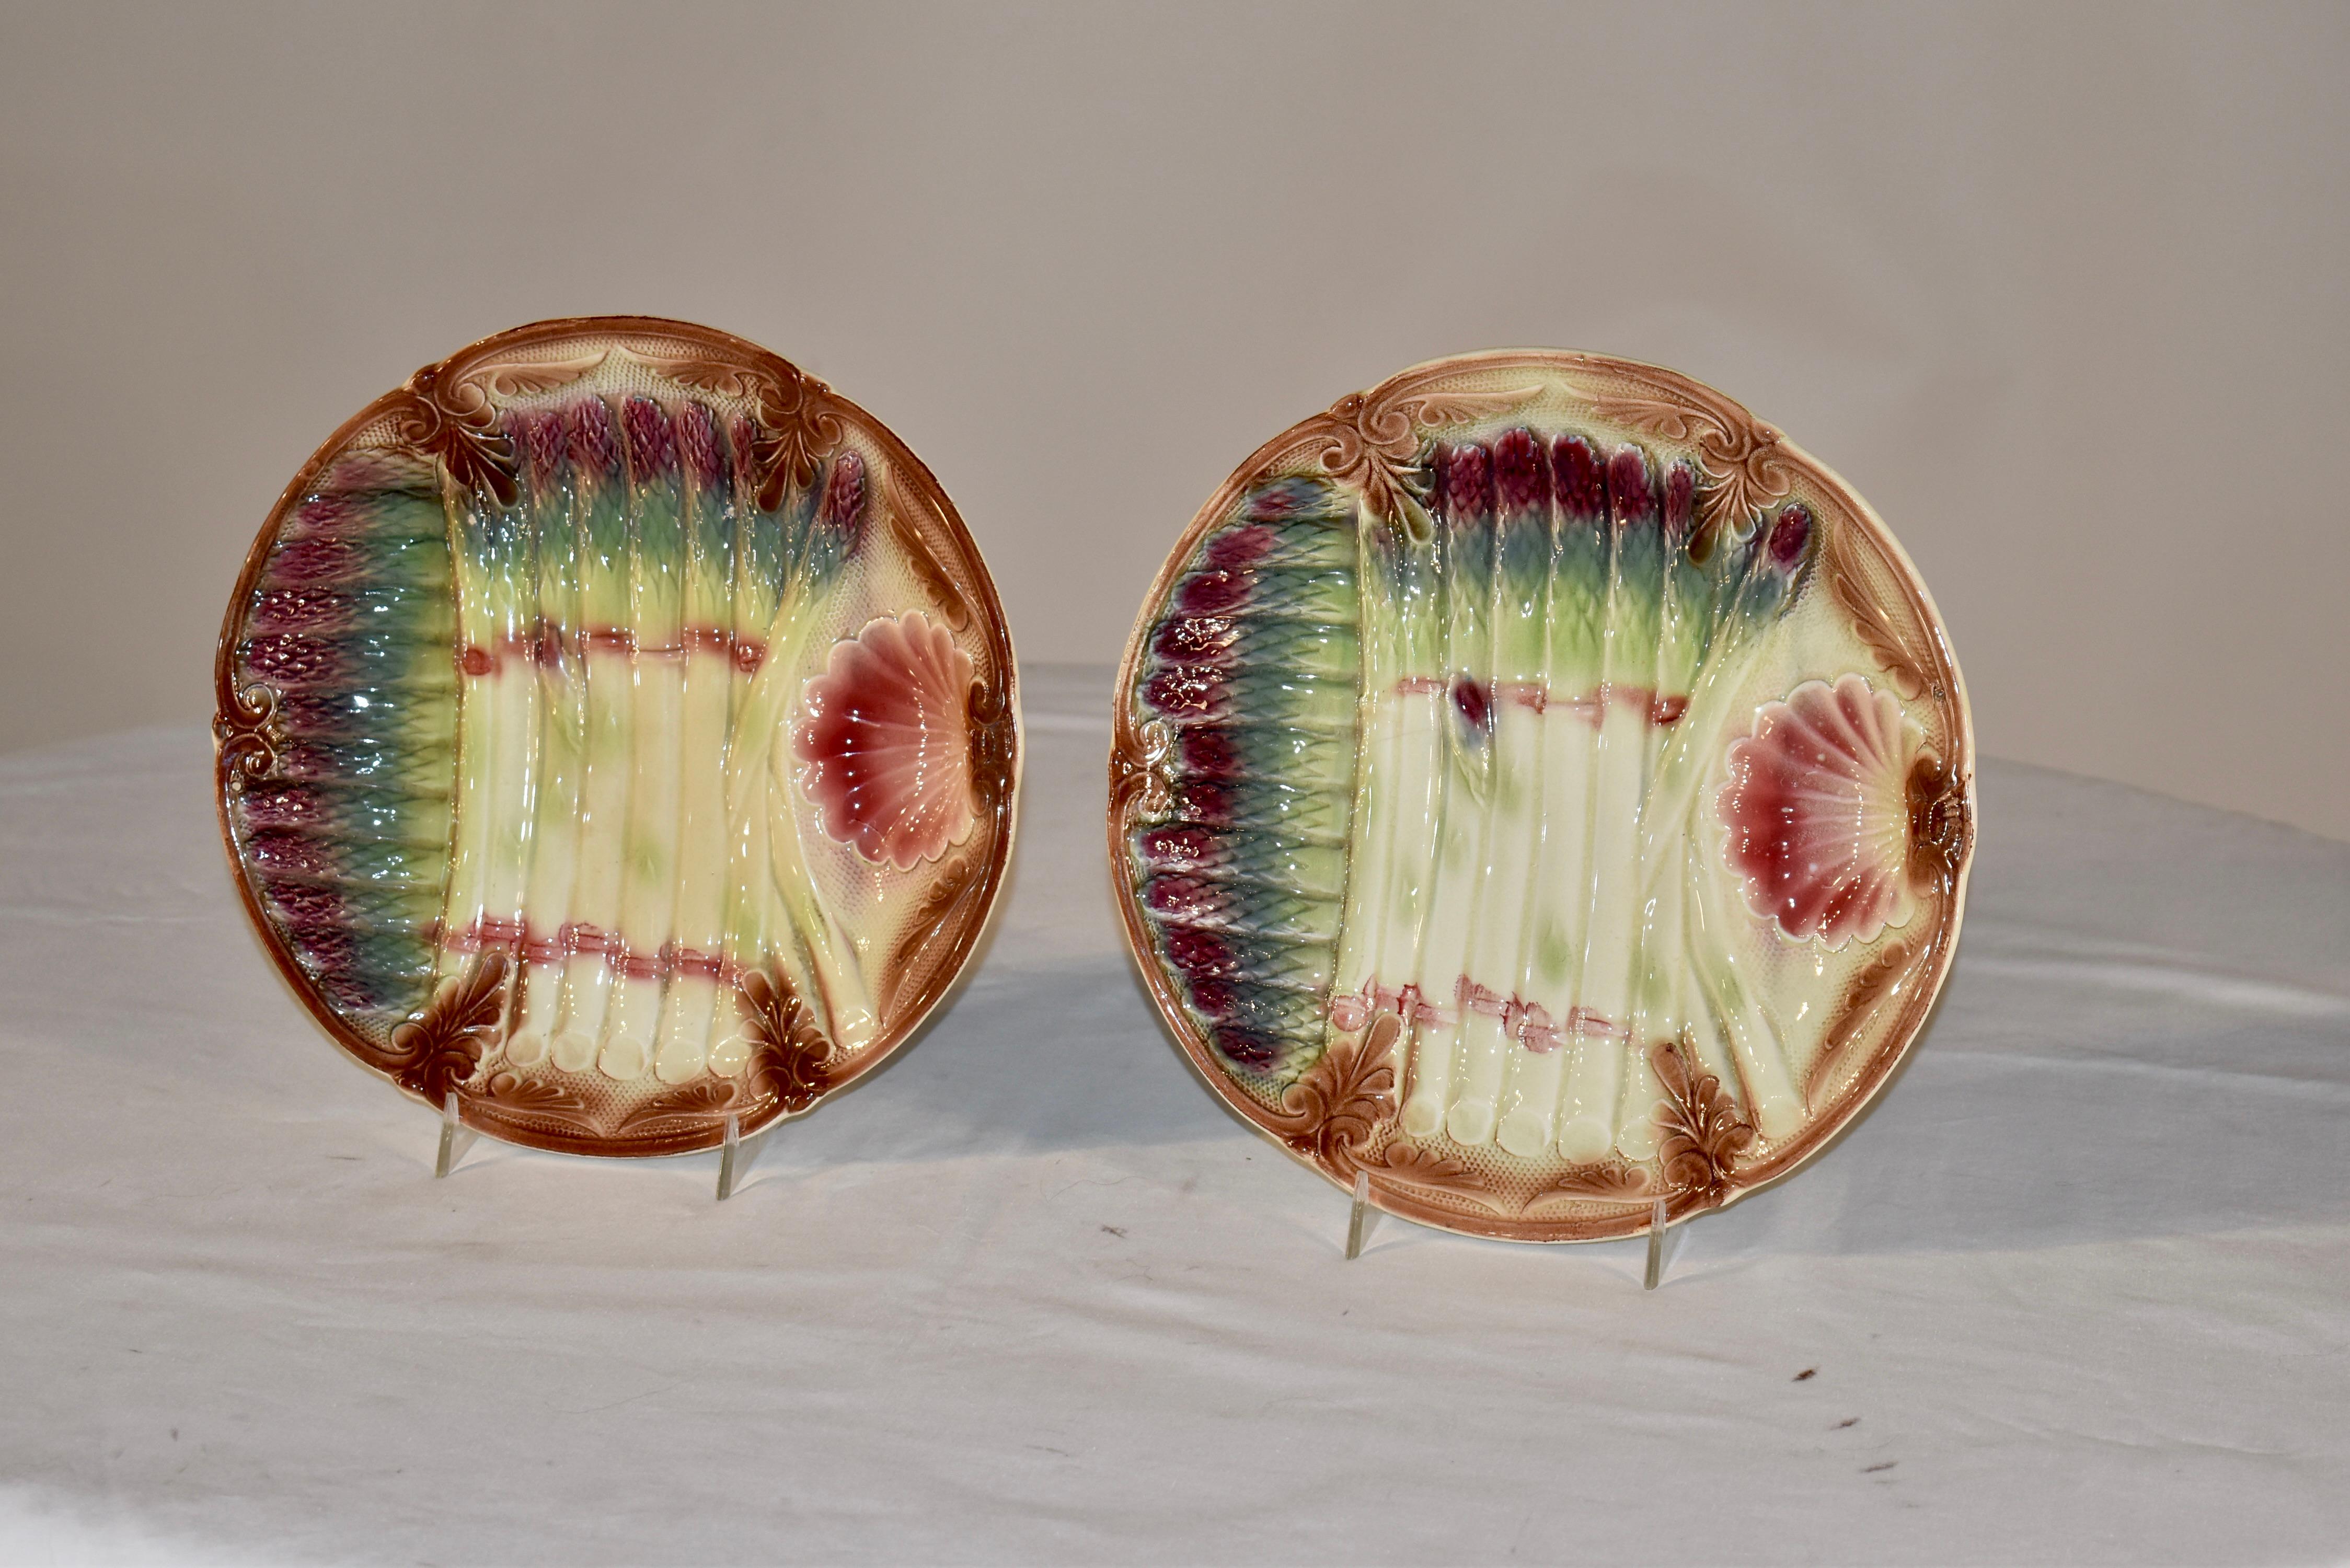 Pair of gorgeous 19th century majolica asparagus plates from France. they have lovely scrolled borders in shades of brown , with crossed asparagus spears in extraordinary detail and color, with a scallop shell shaped indentation to be used for sauce.